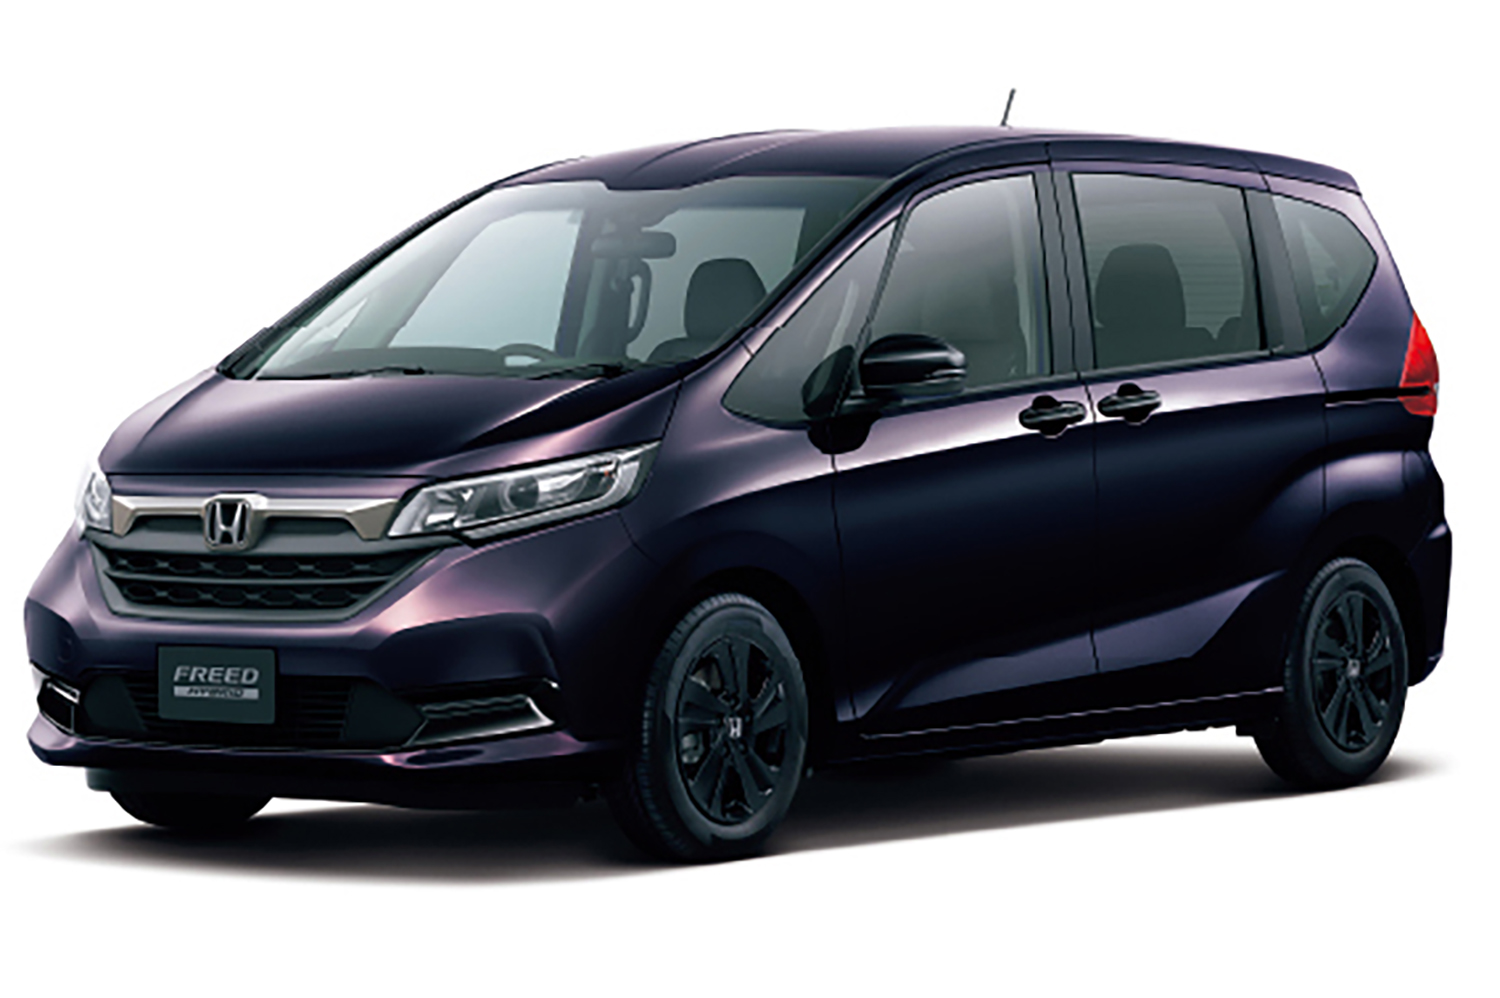 New Honda Freed Launched in Japan – Watch the Press Conference Video ...